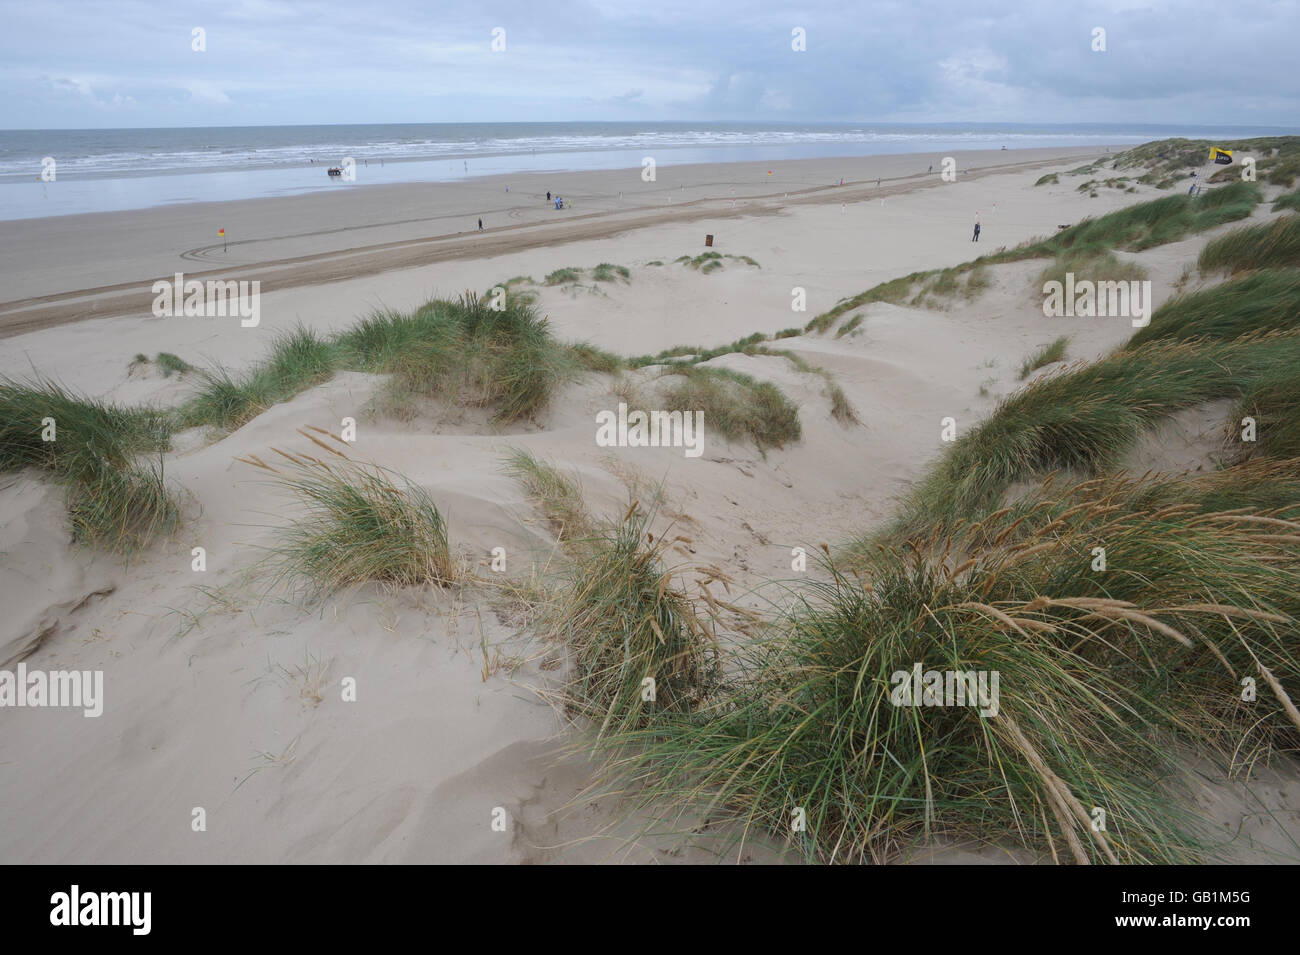 A general view of the beach at Cefn Sidan, near Burry Port, west Wales, where a 16-year-old boy died after a tunnel dug in sand dunes collapsed last night. Stock Photo